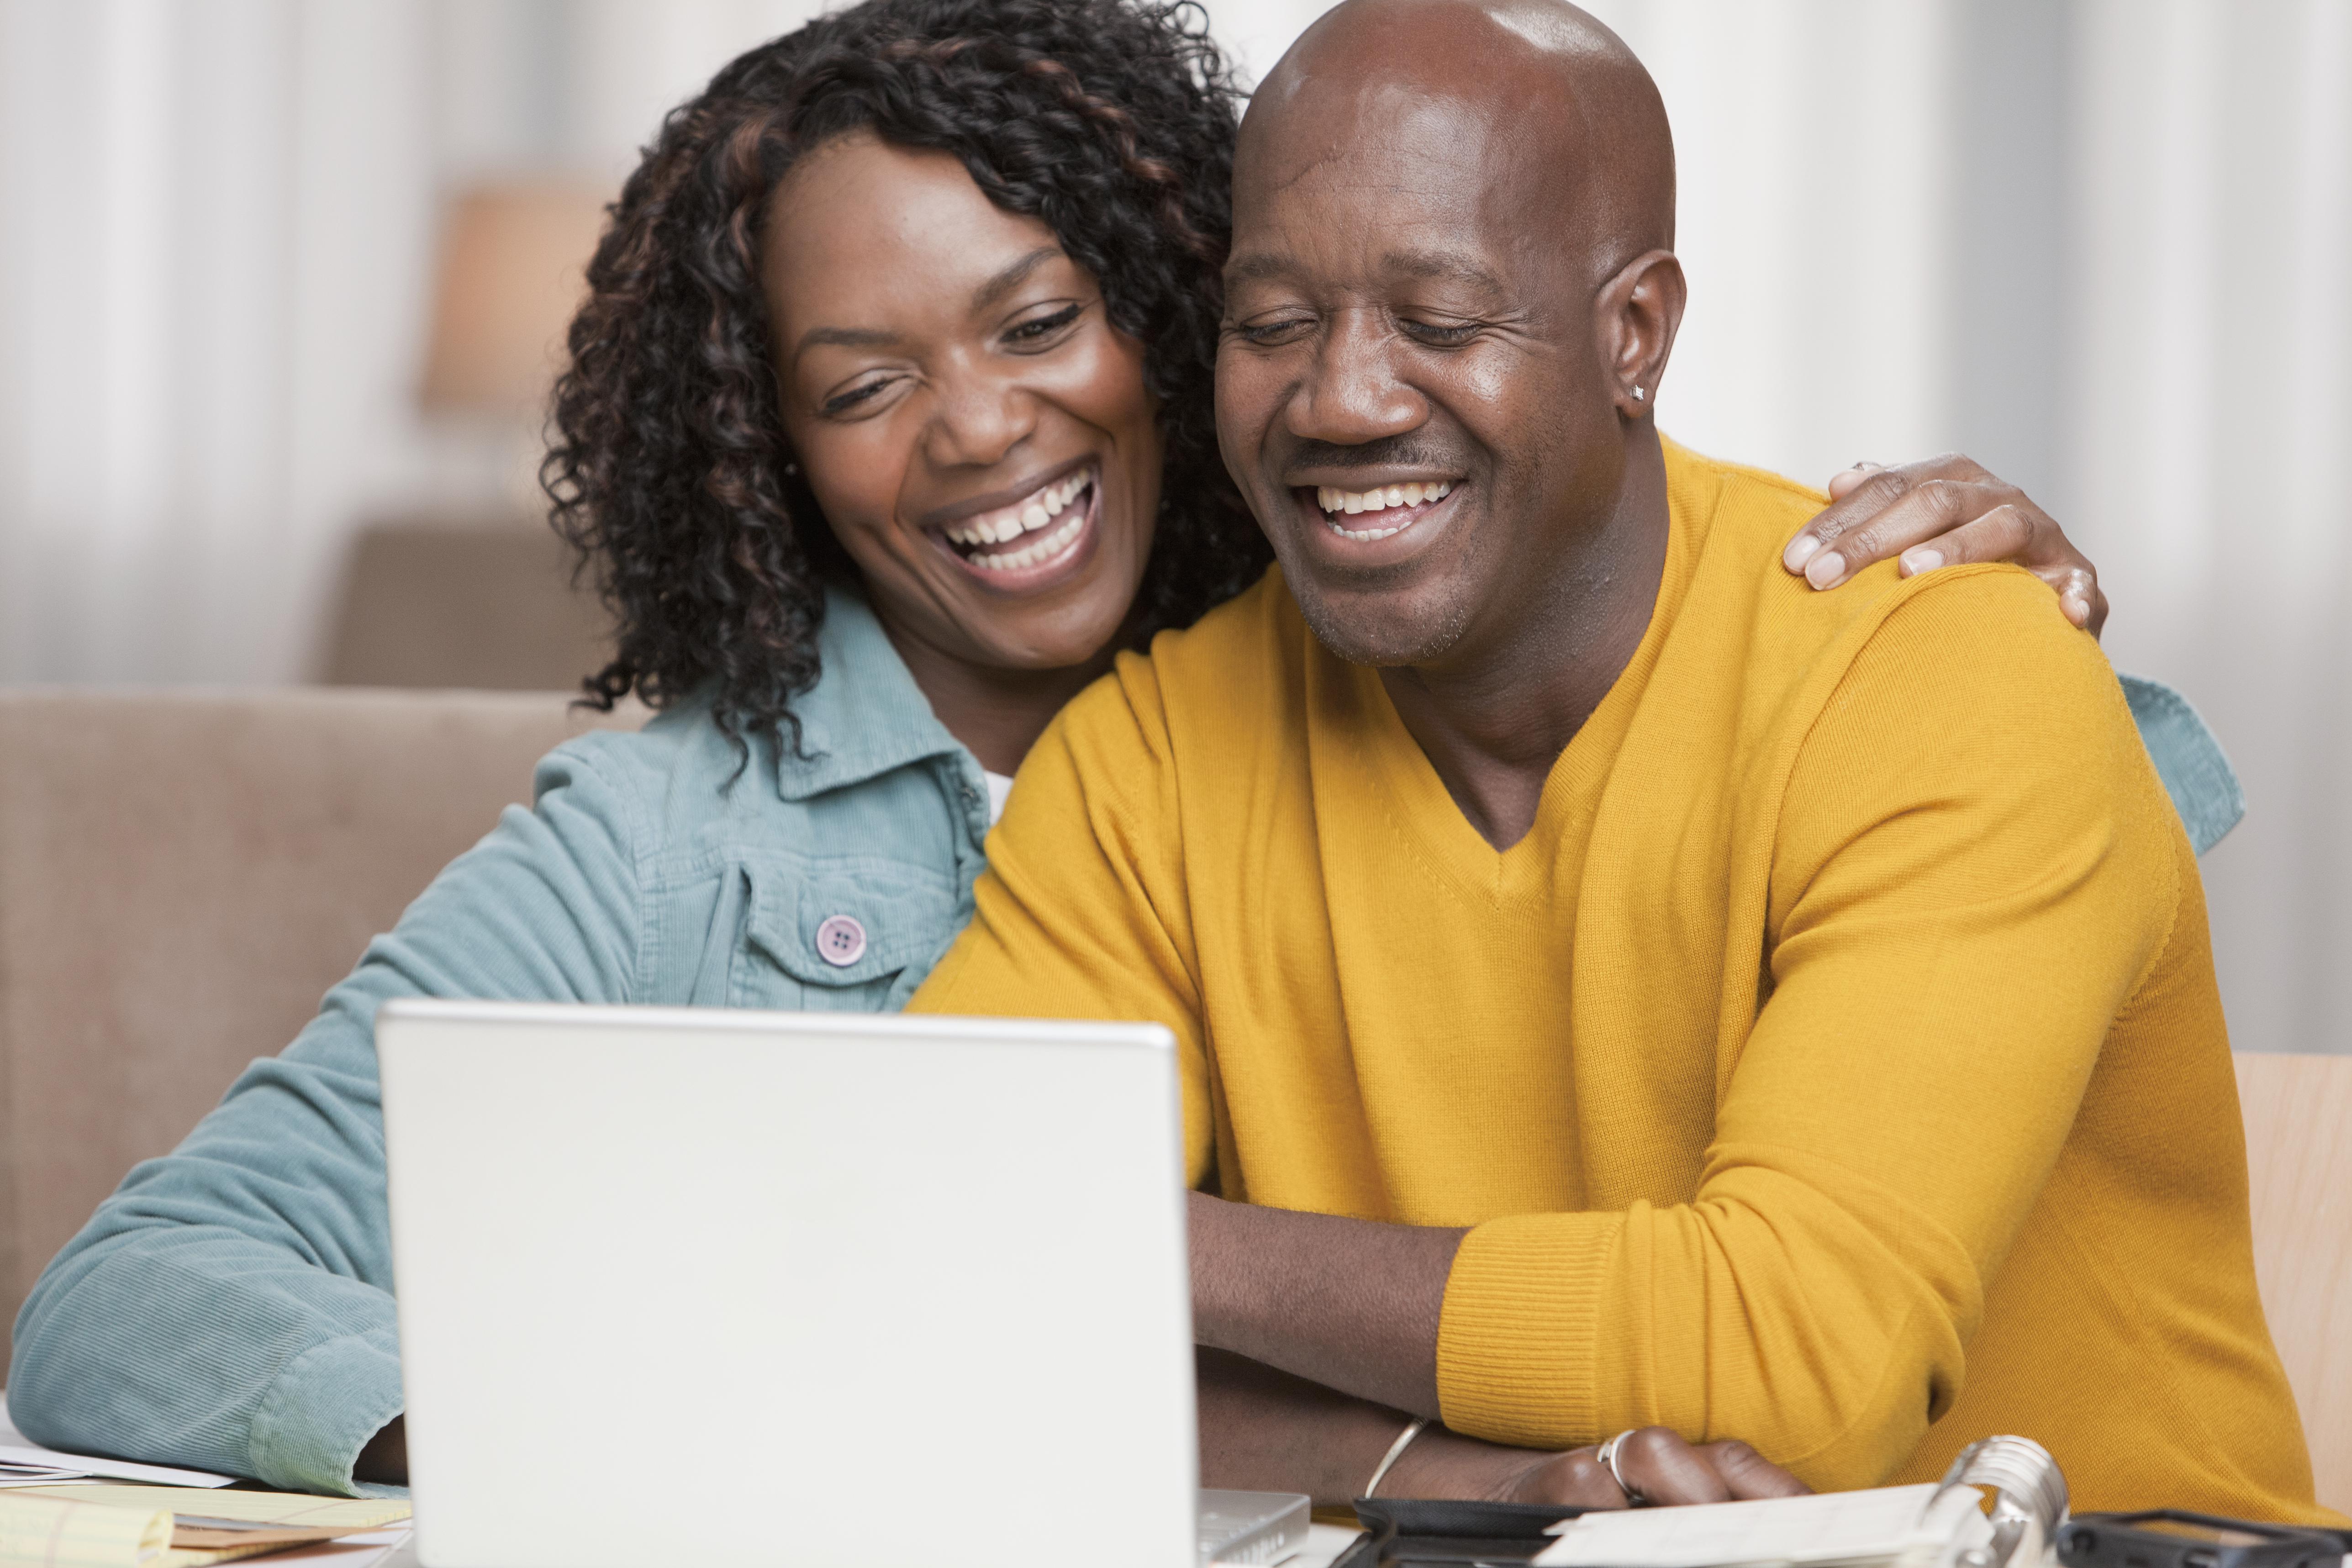 Smiling African American couple using laptop together